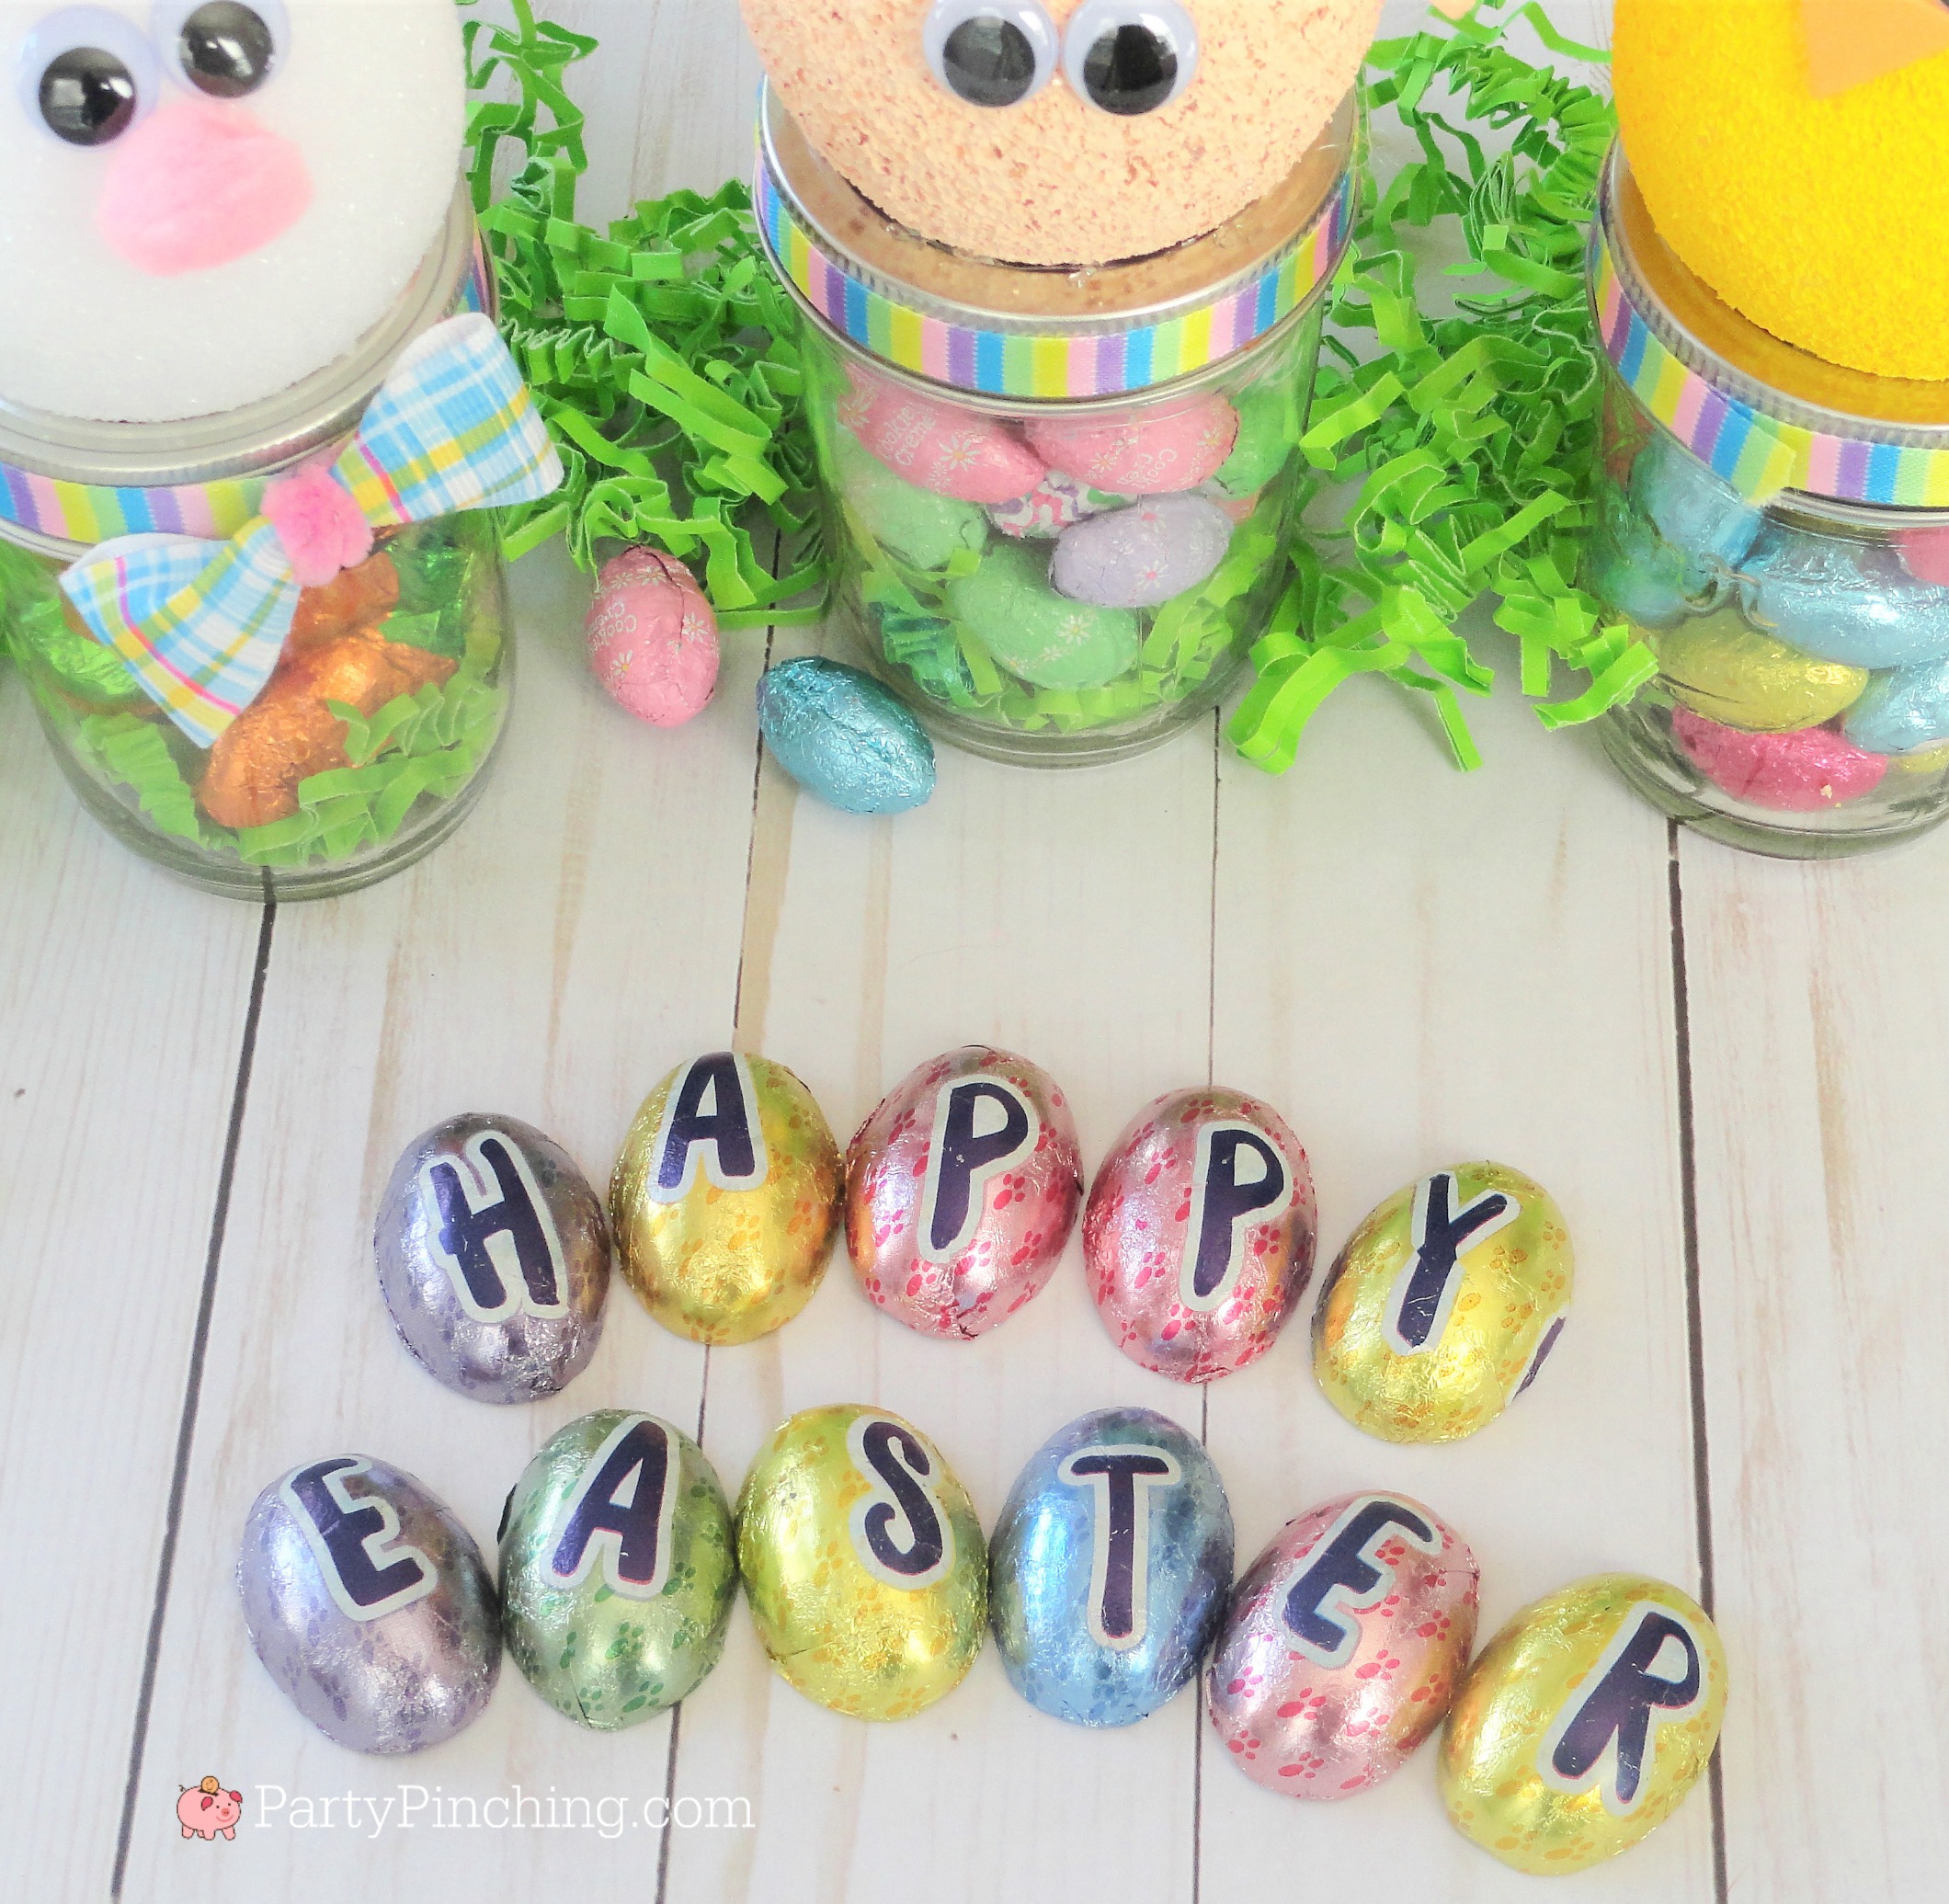 eggwords palmer candy, Easter candy ideas, cute Easter favors and crafts